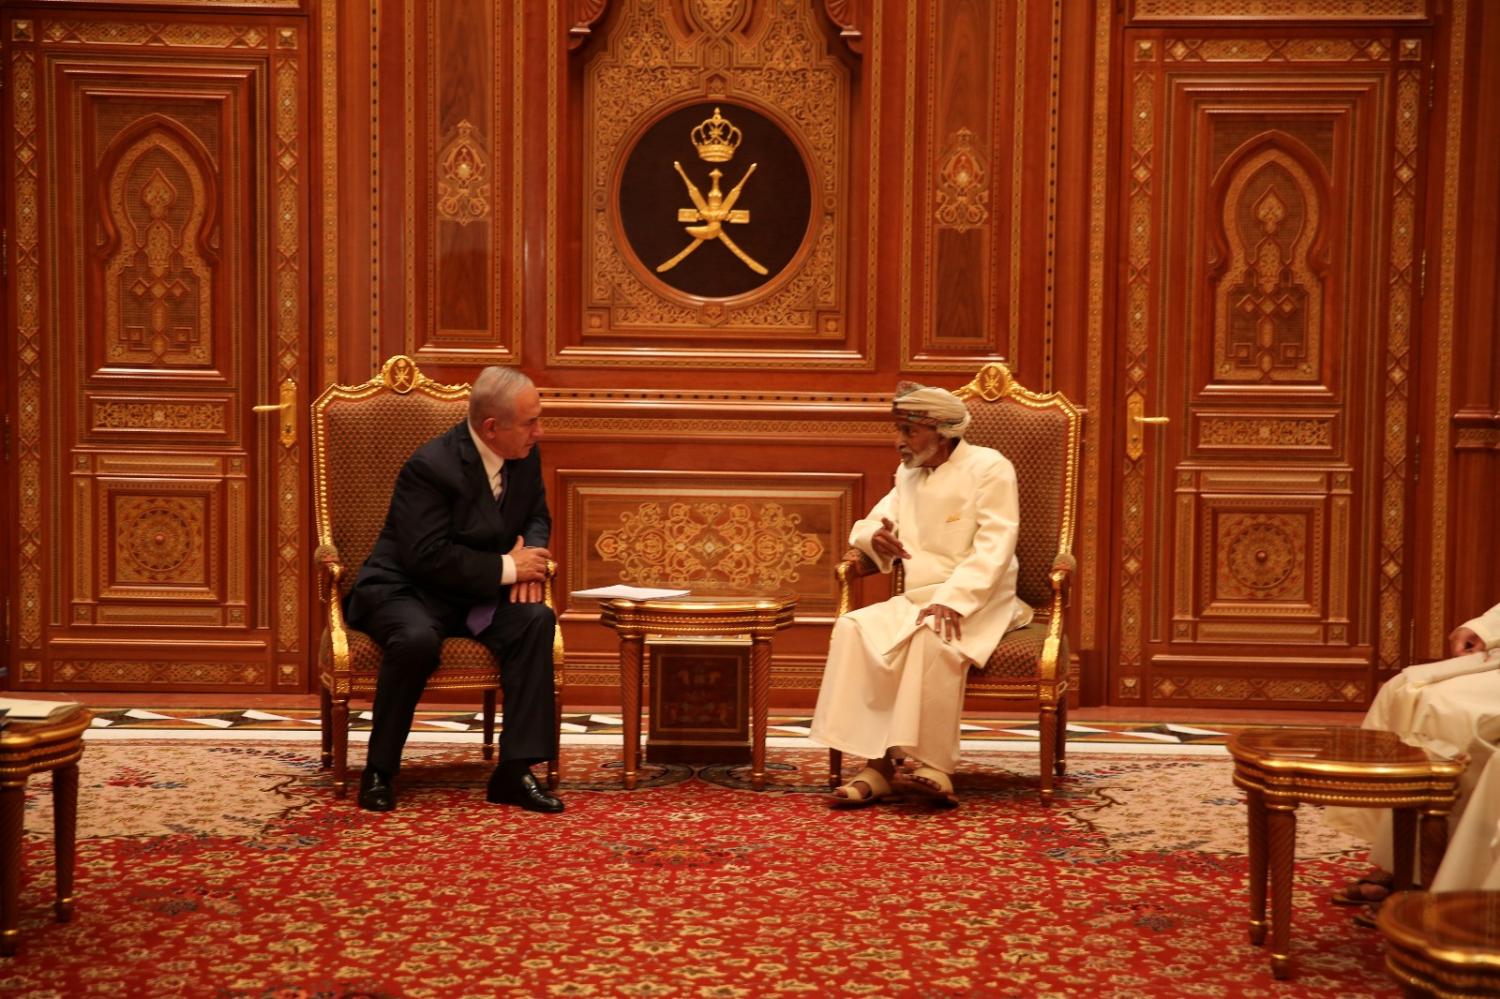 Israel Prime Minister Office Israeli Prime minister Benjamin Netanyahu meets Sultan Qaboos bin Said in this undated handout provided by the Israel Prime Minister Office, in Oman. Israel GPO/Handout via REUTERS ATTENTION EDITORS - THIS PICTURE WAS PROVIDED BY A THIRD PARTY. - RC191FF37EB0